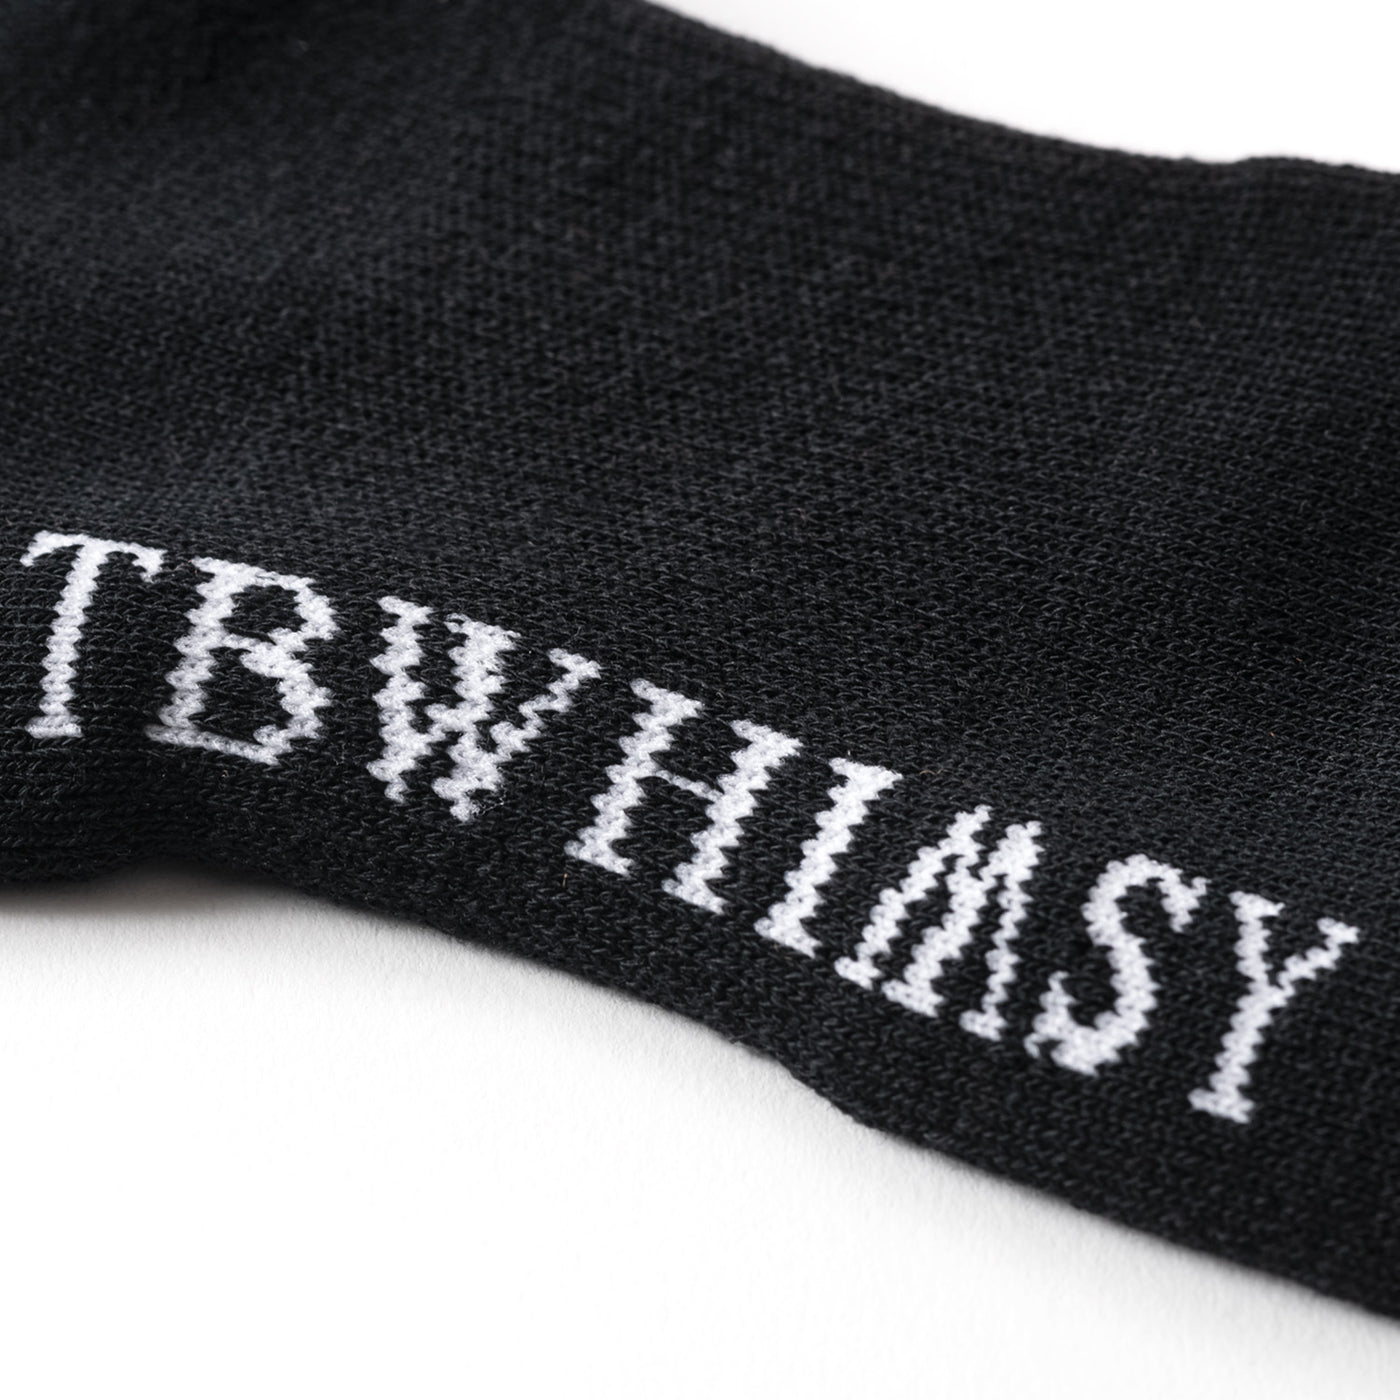 LABEL LOGO HIGH SOCKS - Why are you here?